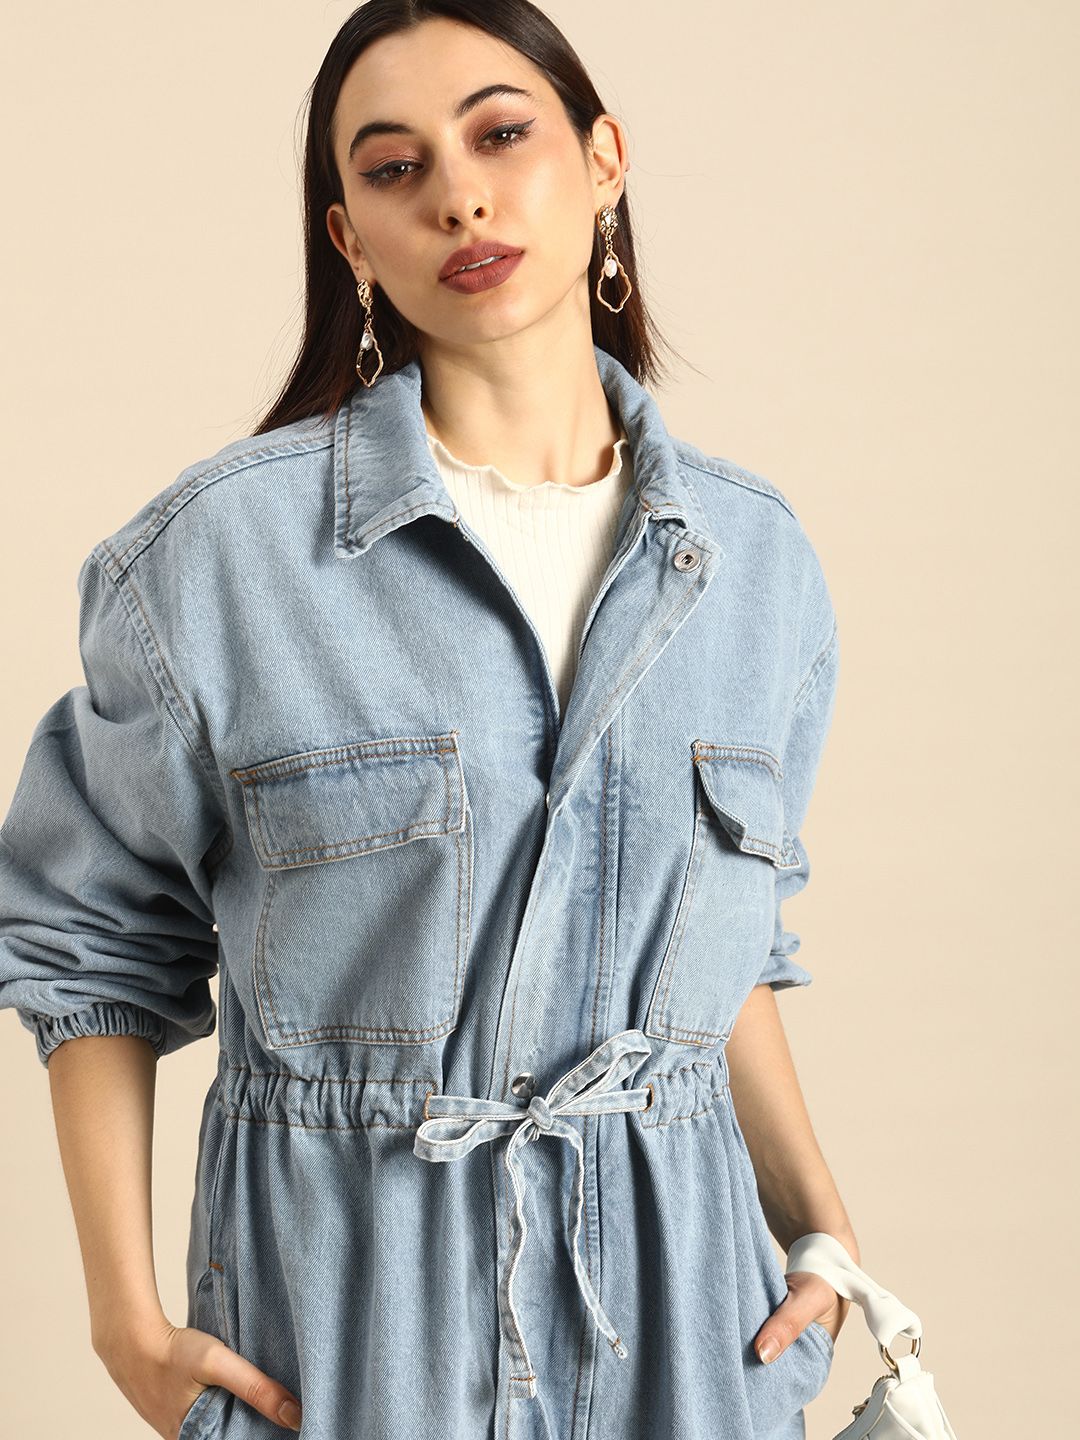 all about you Women Blue Washed Denim Jacket Price in India